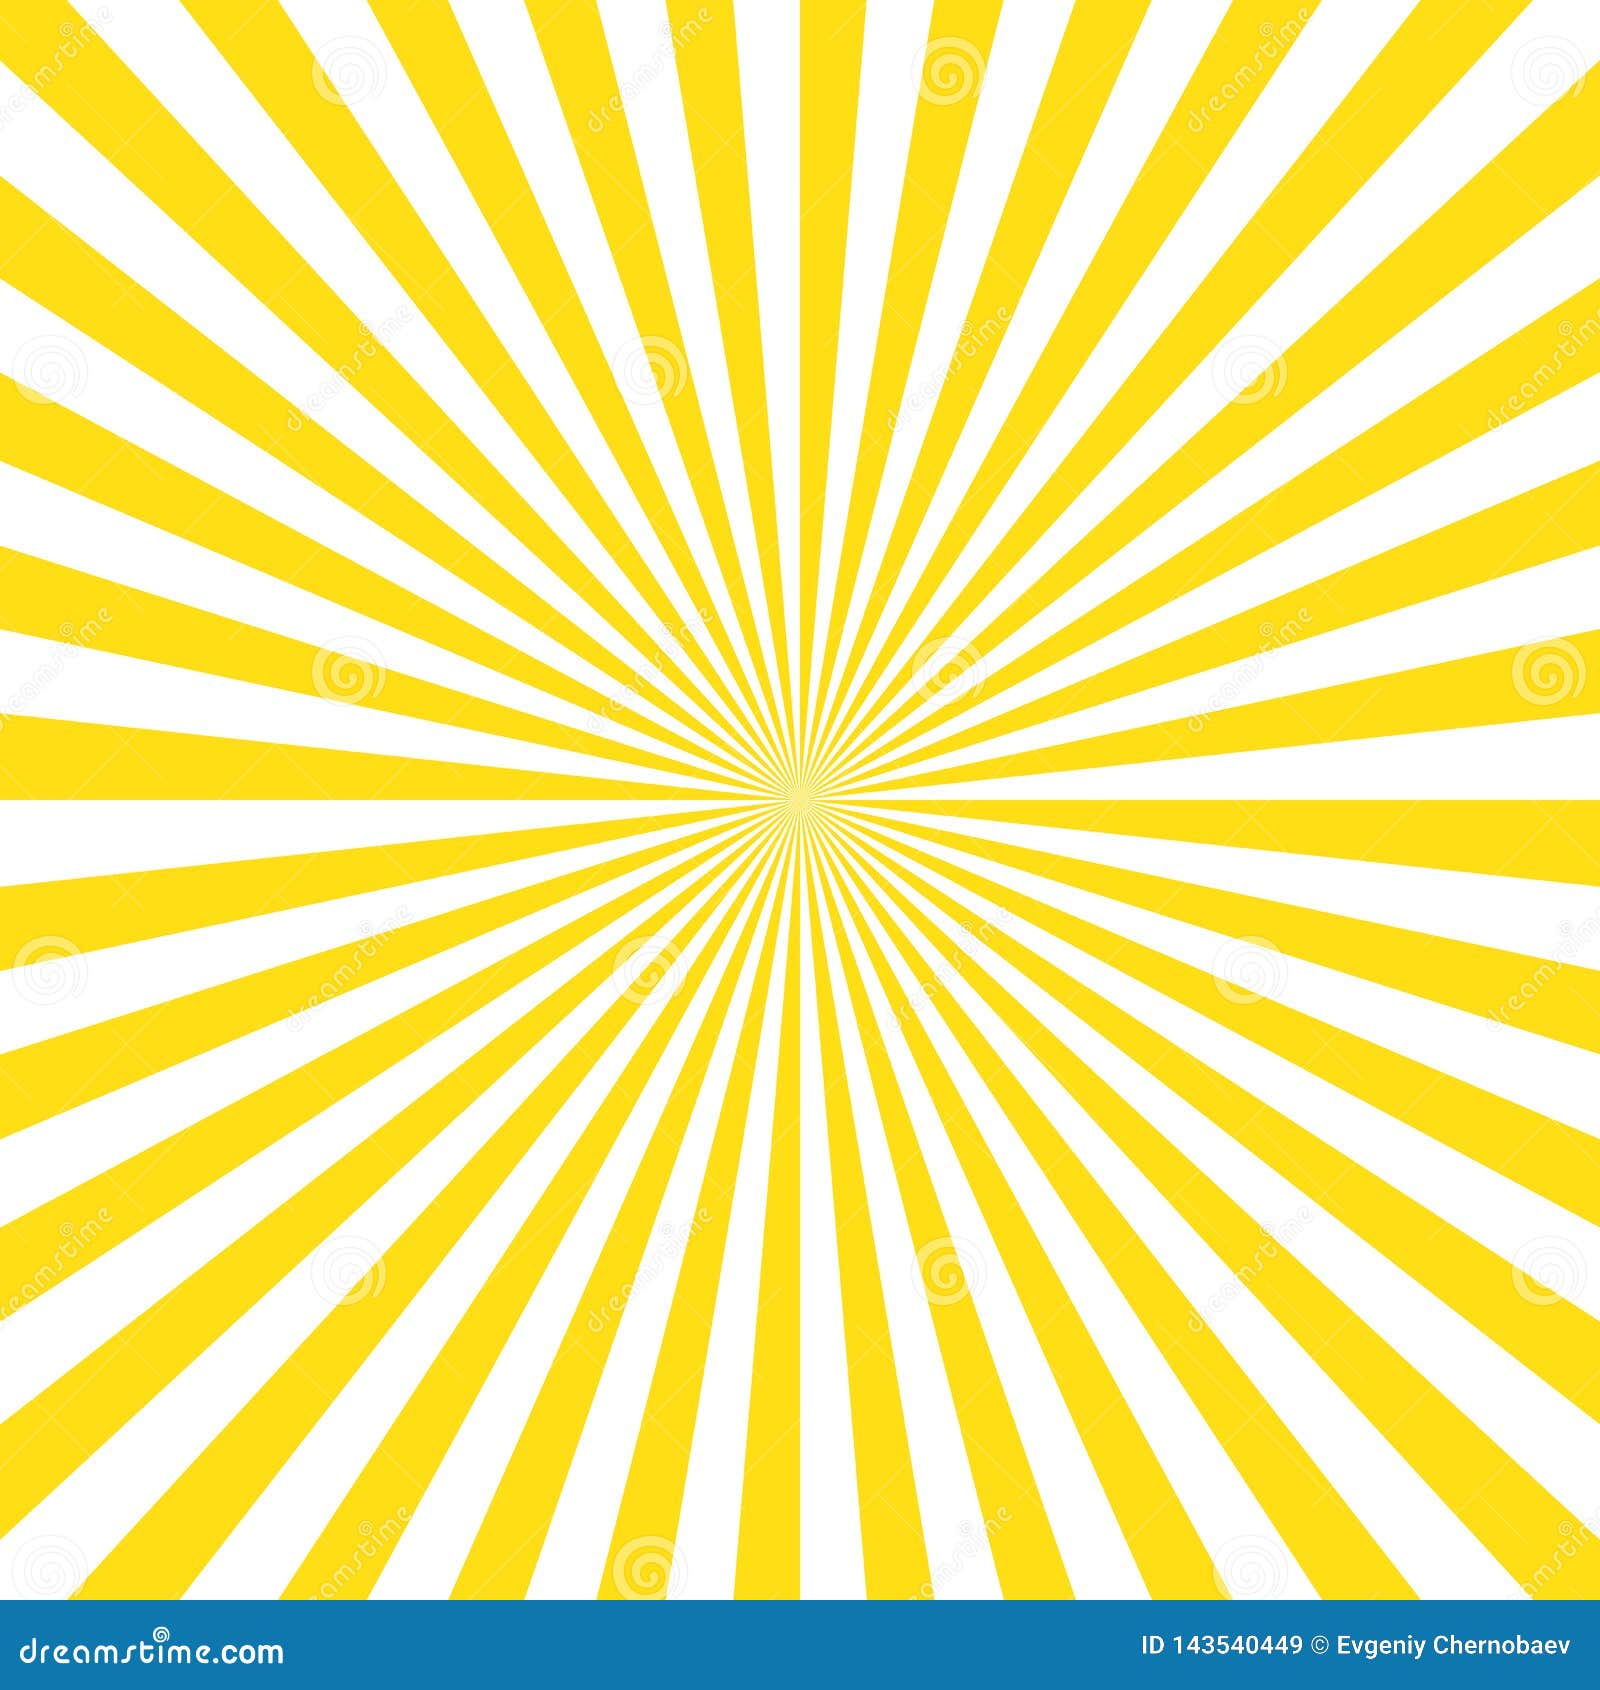 Yellow Stripes Sunrays Background. Sunrays Yellow Color Vector Eps10  Background. Stock Vector - Illustration of sunrays, retro: 143540449